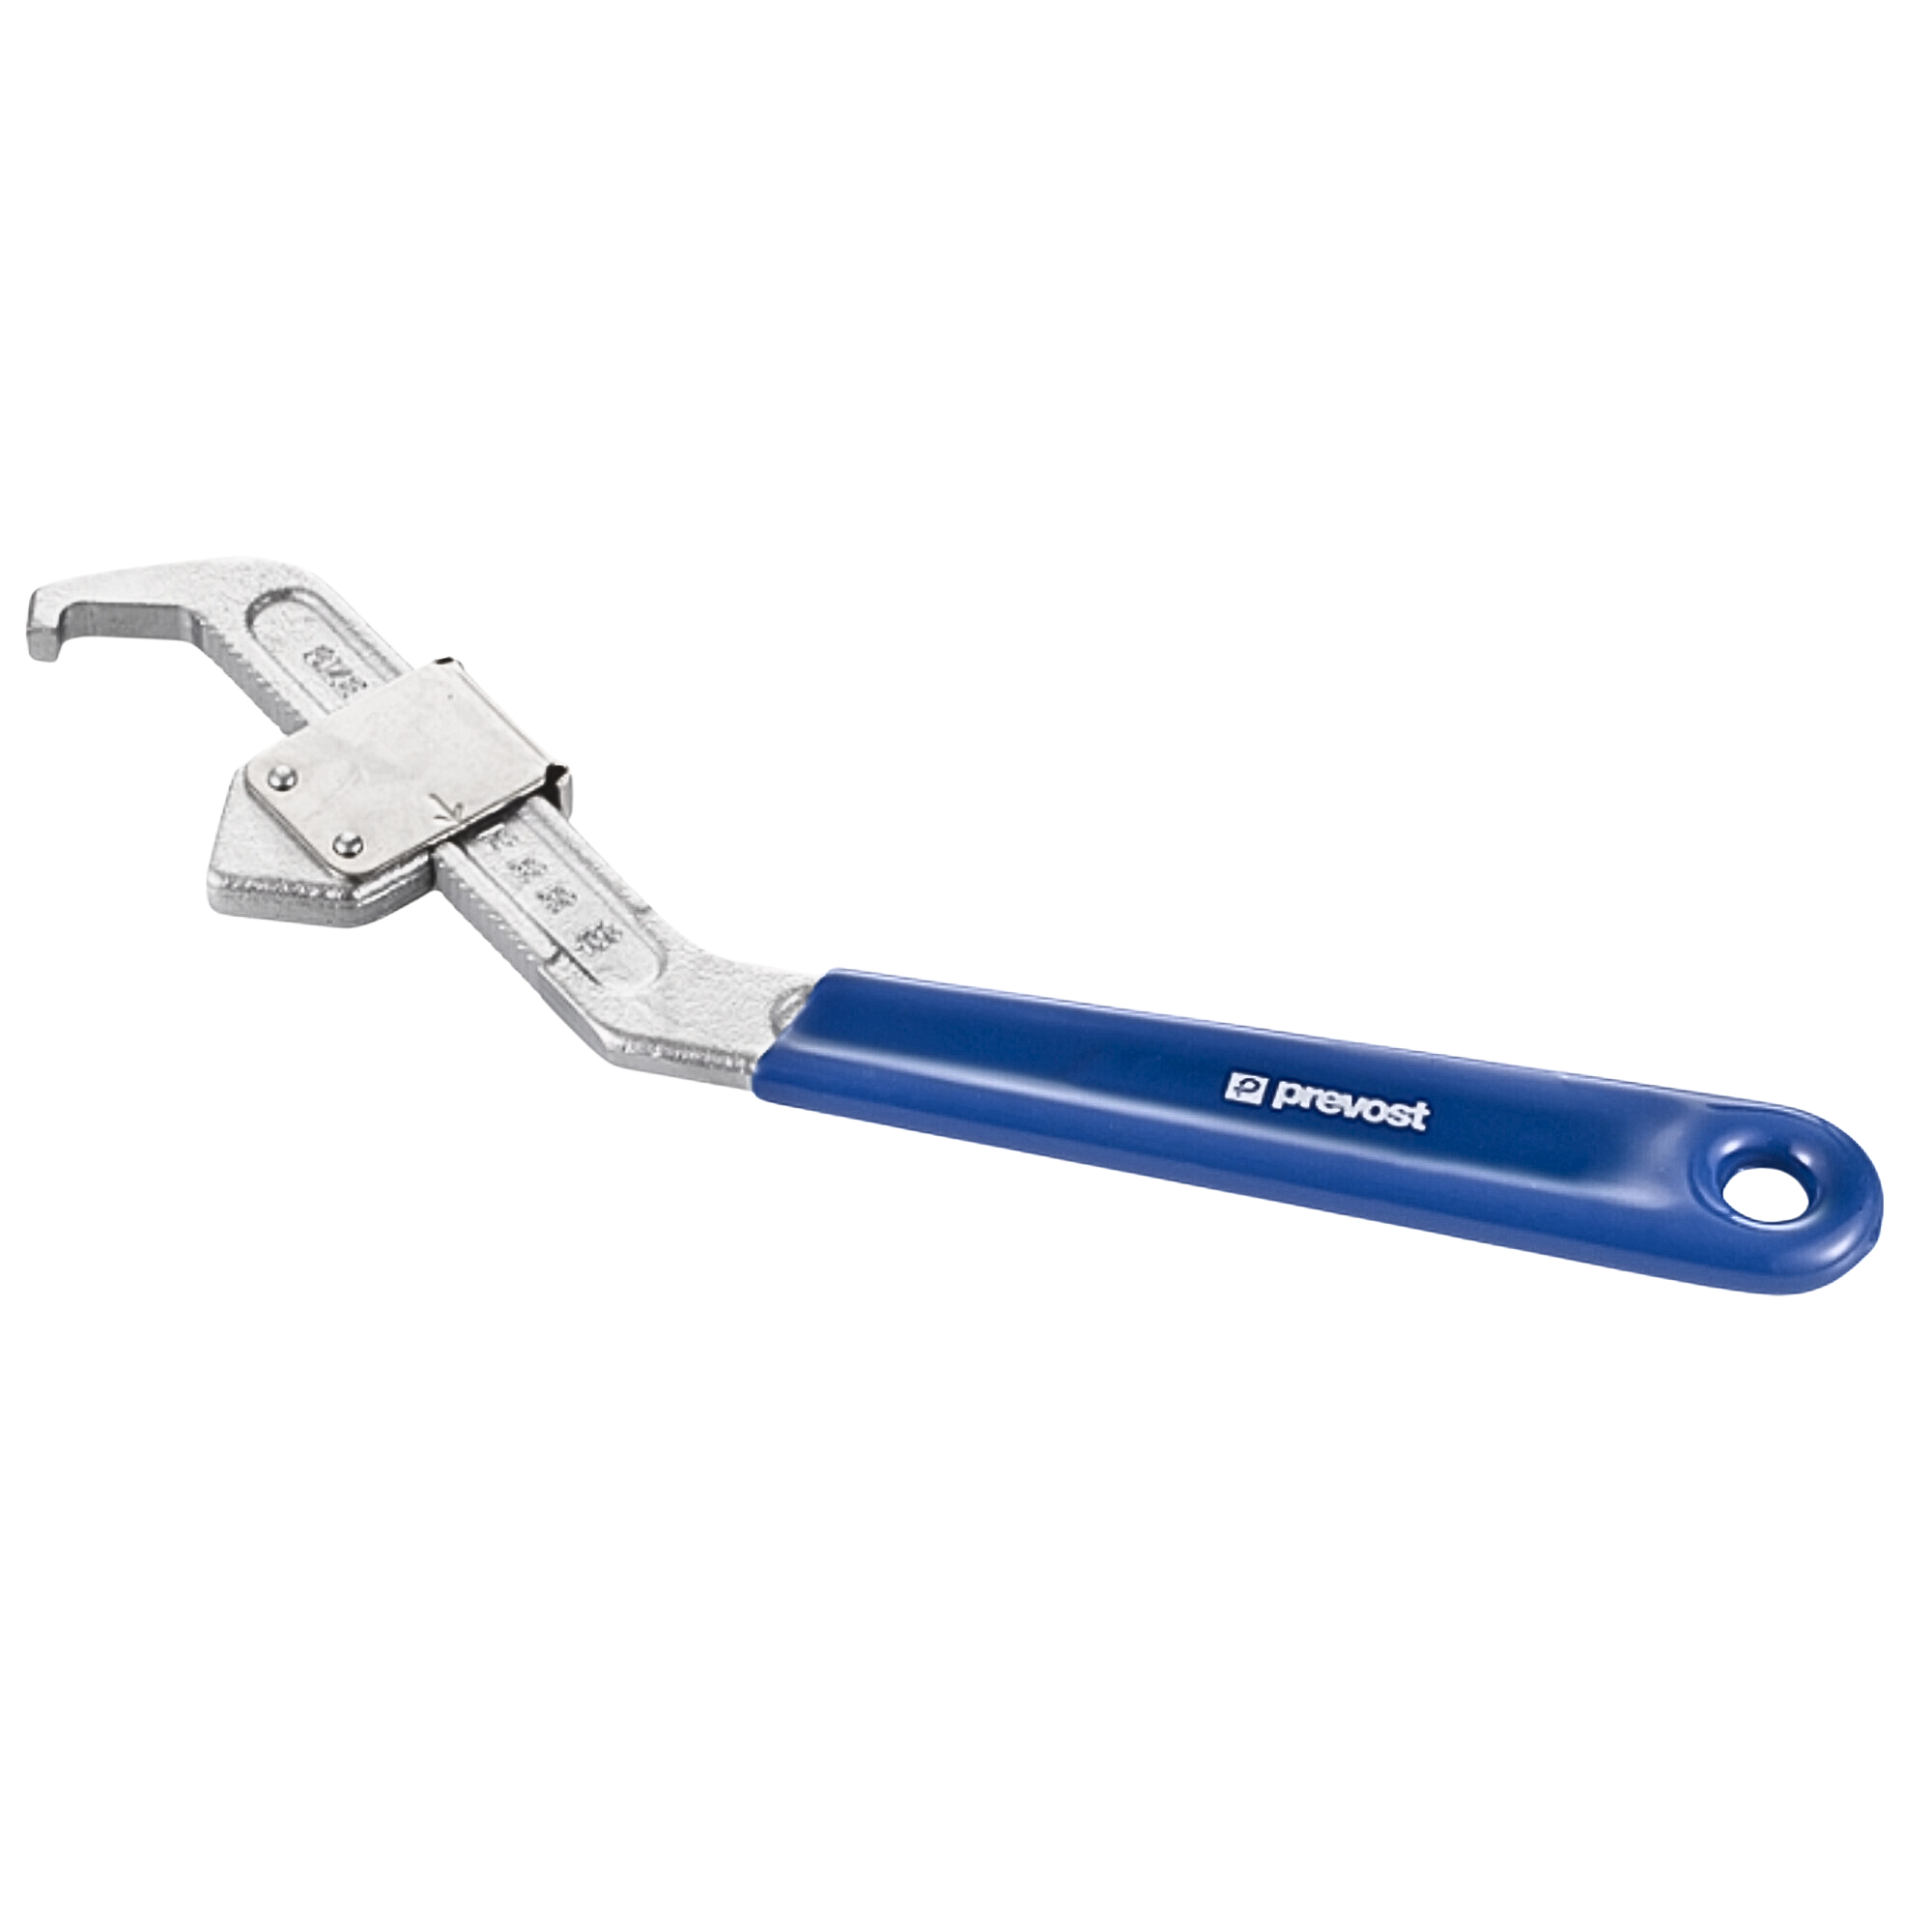 PPS CLESTD - Neutral hook spanner used on prevos1 product line